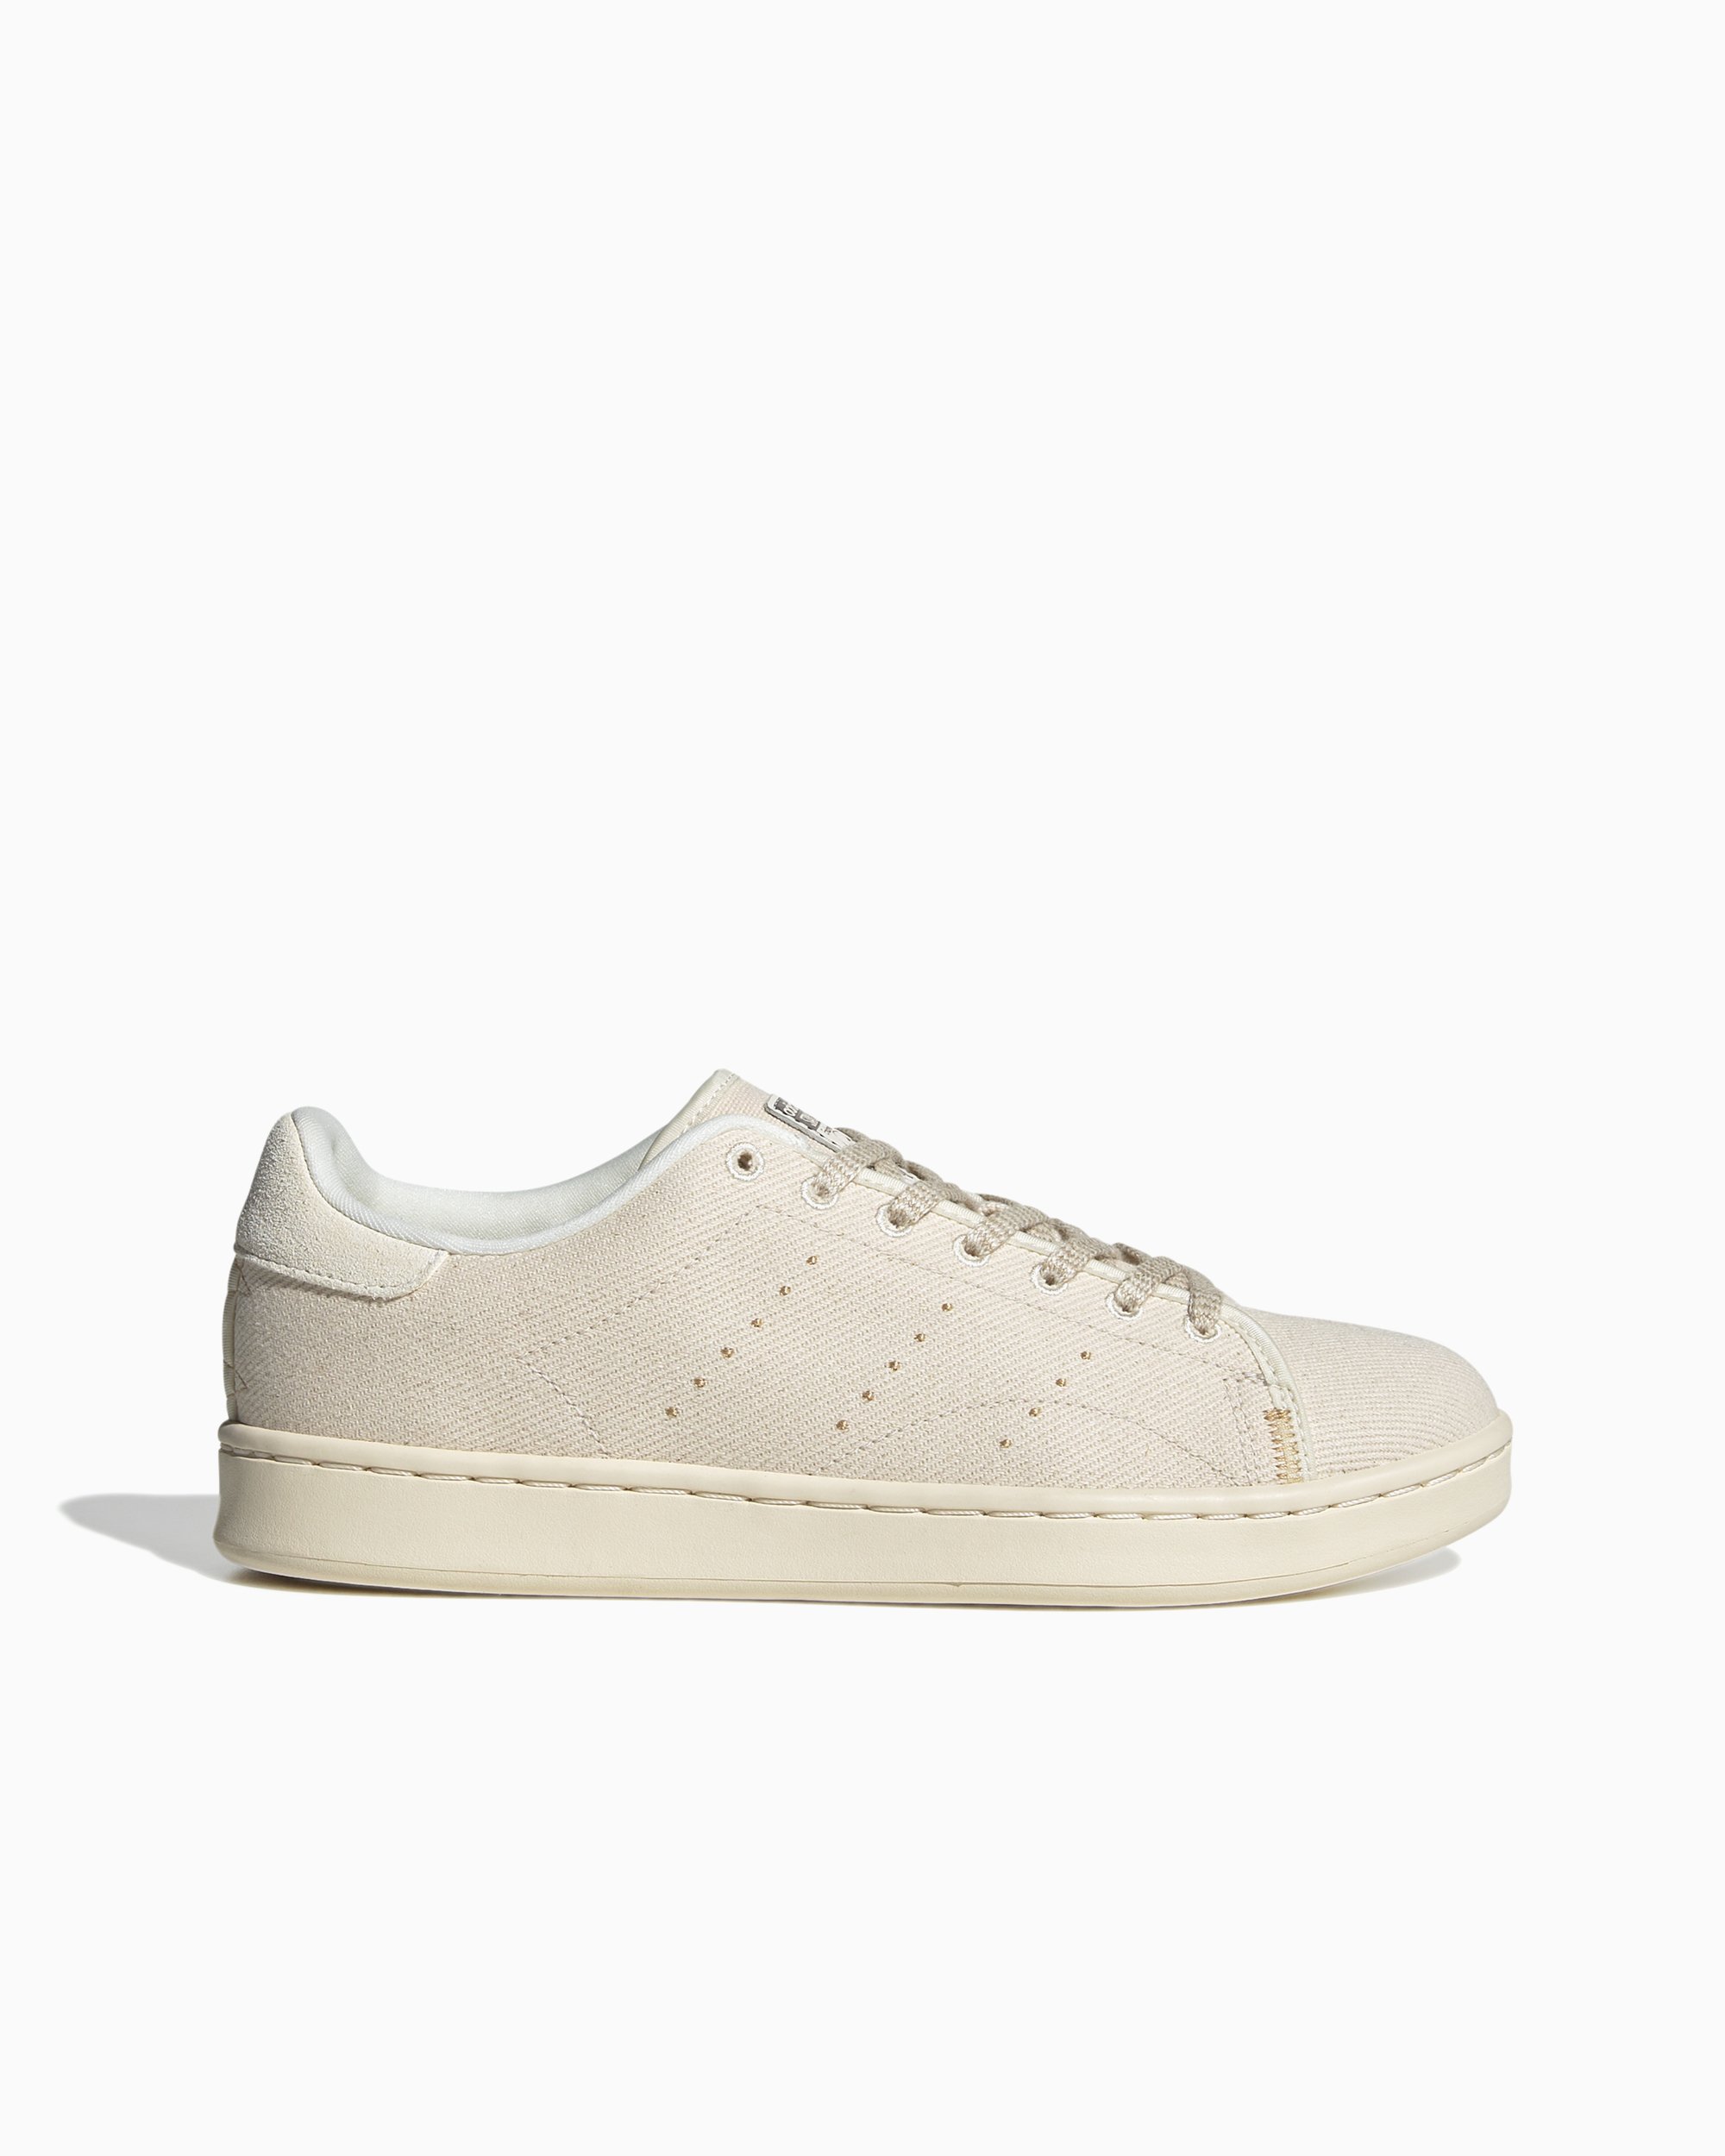 Stan Smith White GY8793| Online at FOOTDISTRICT